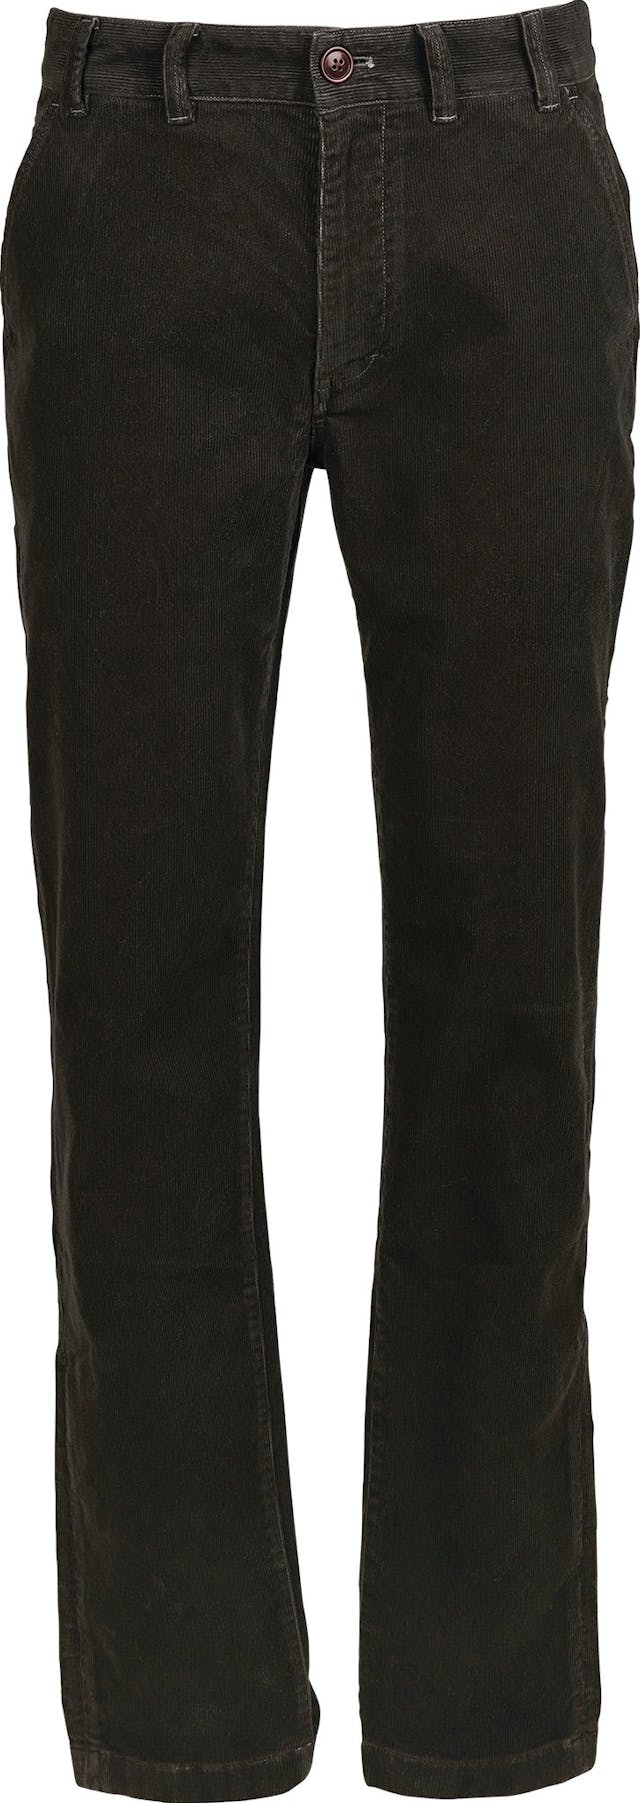 Product image for Neuston Stretch Cord Pant - Men's